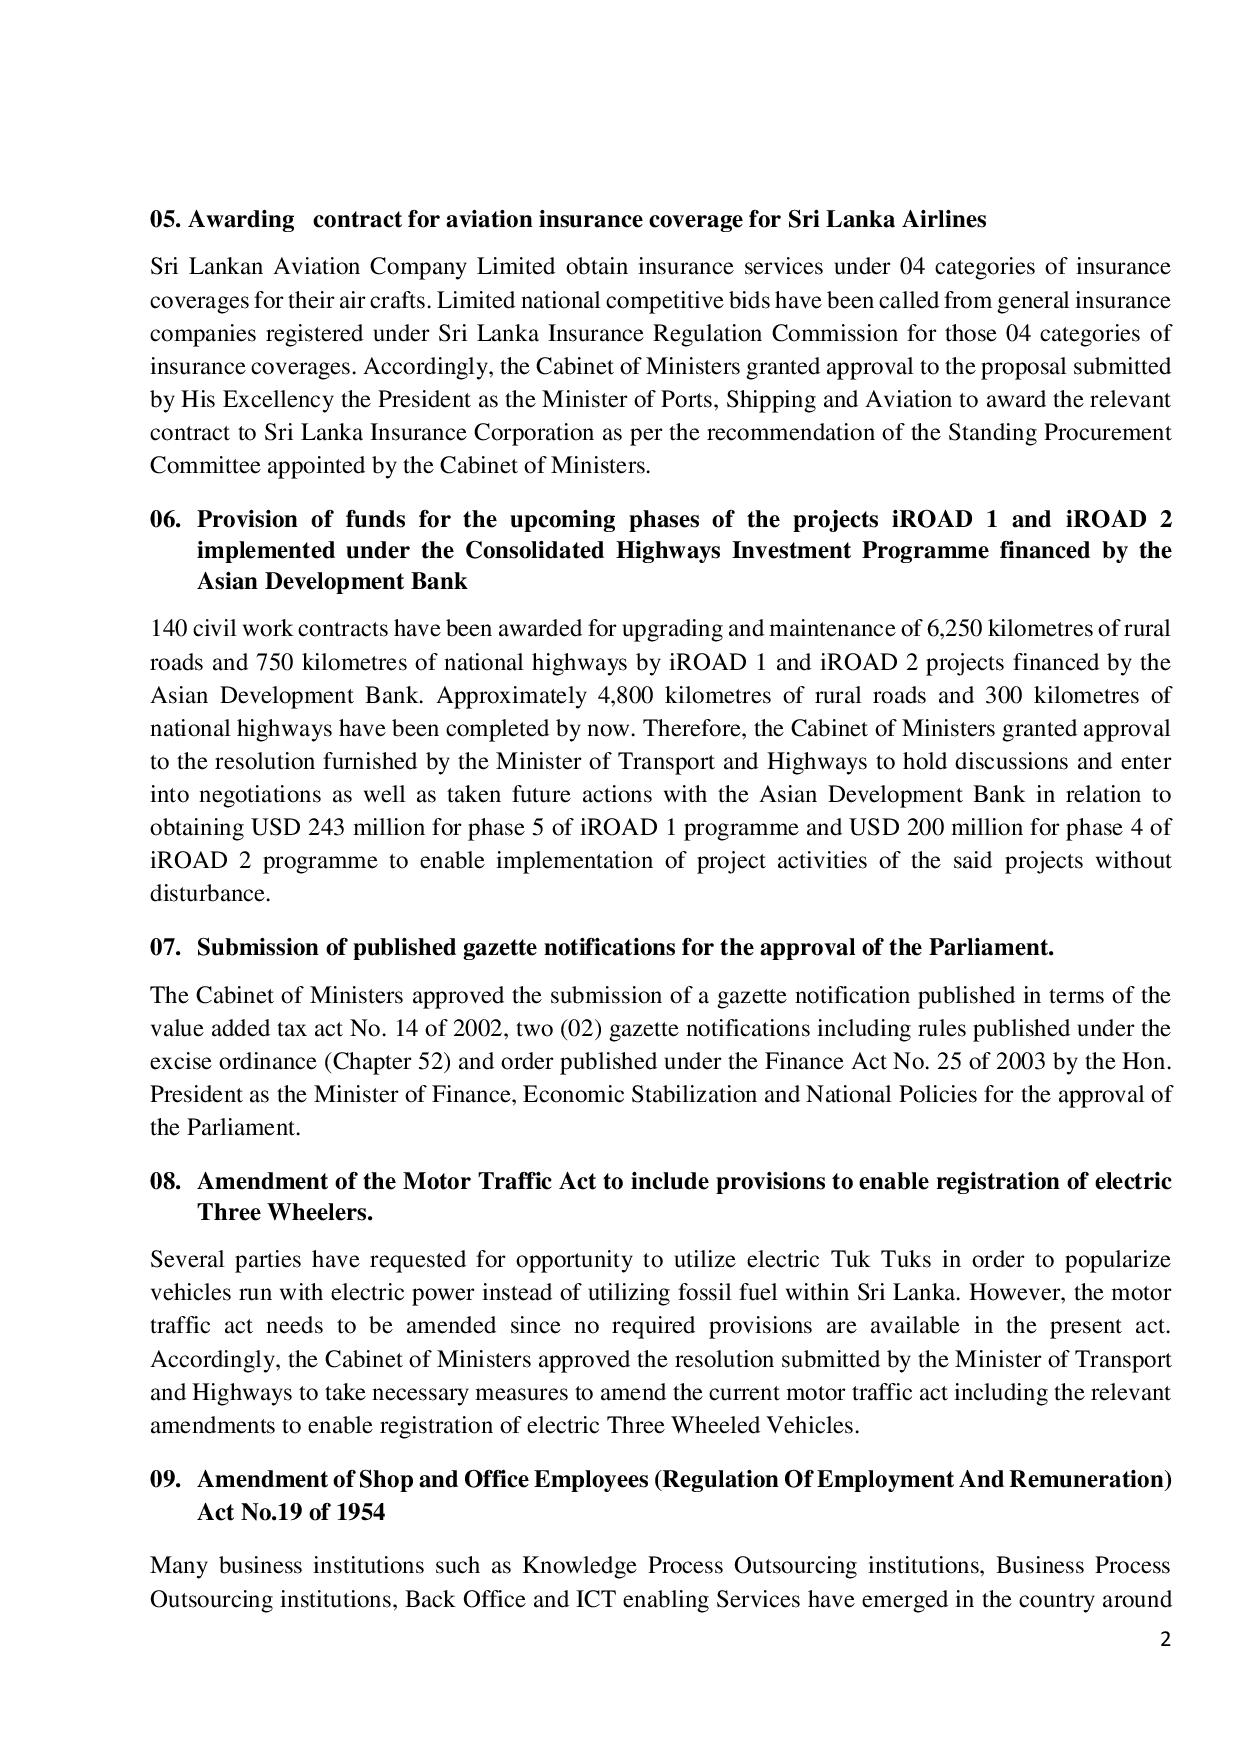 Cabinet Decisions on 08.08.2022 E page 002